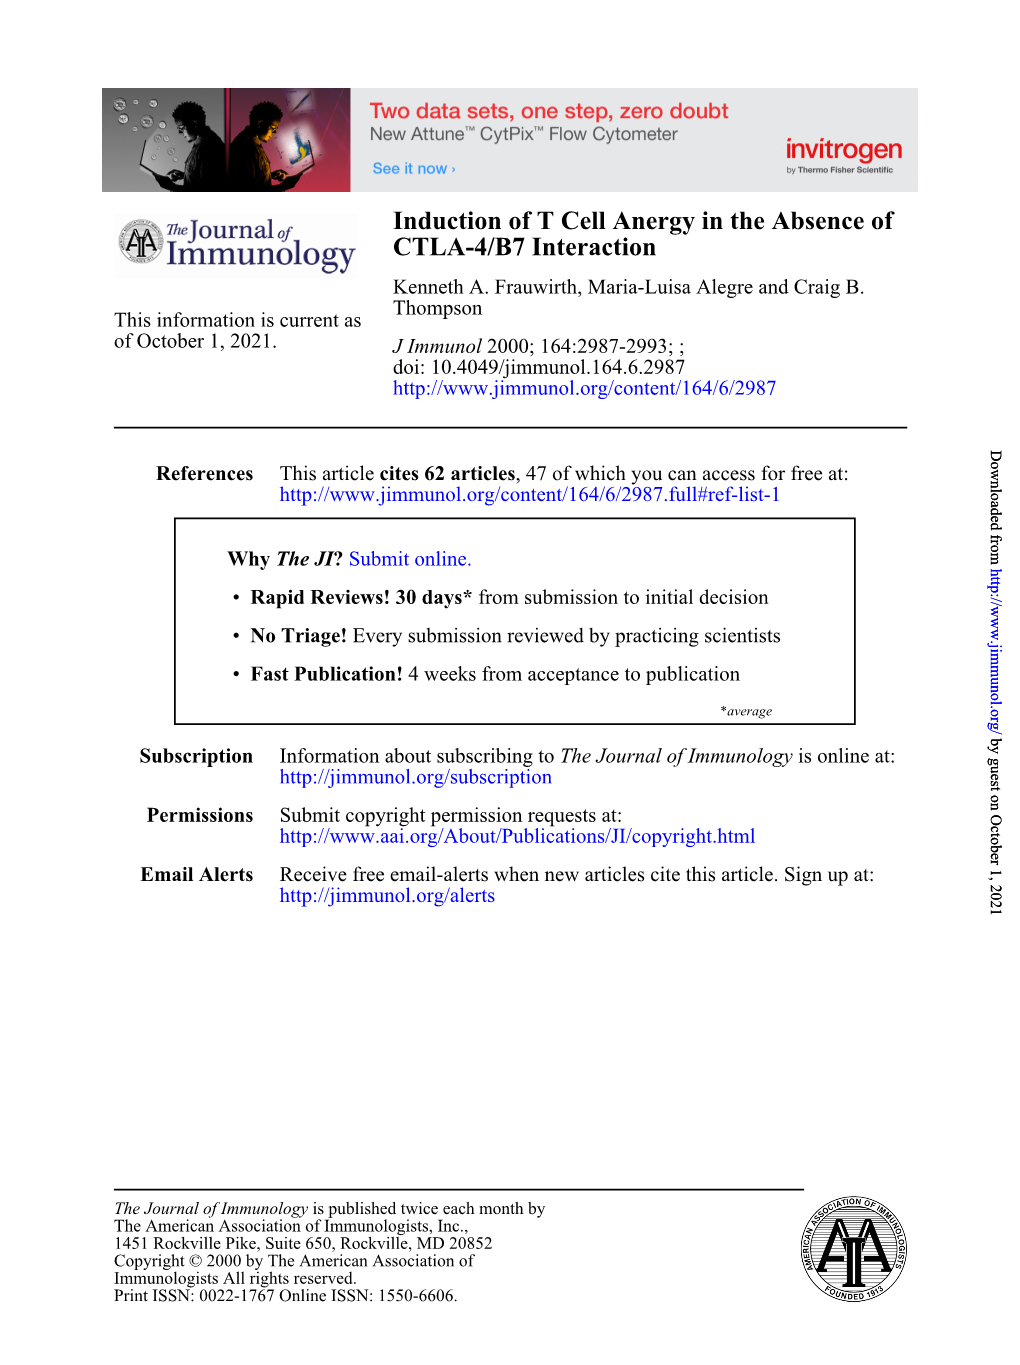 CTLA-4/B7 Interaction Induction of T Cell Anergy in the Absence Of